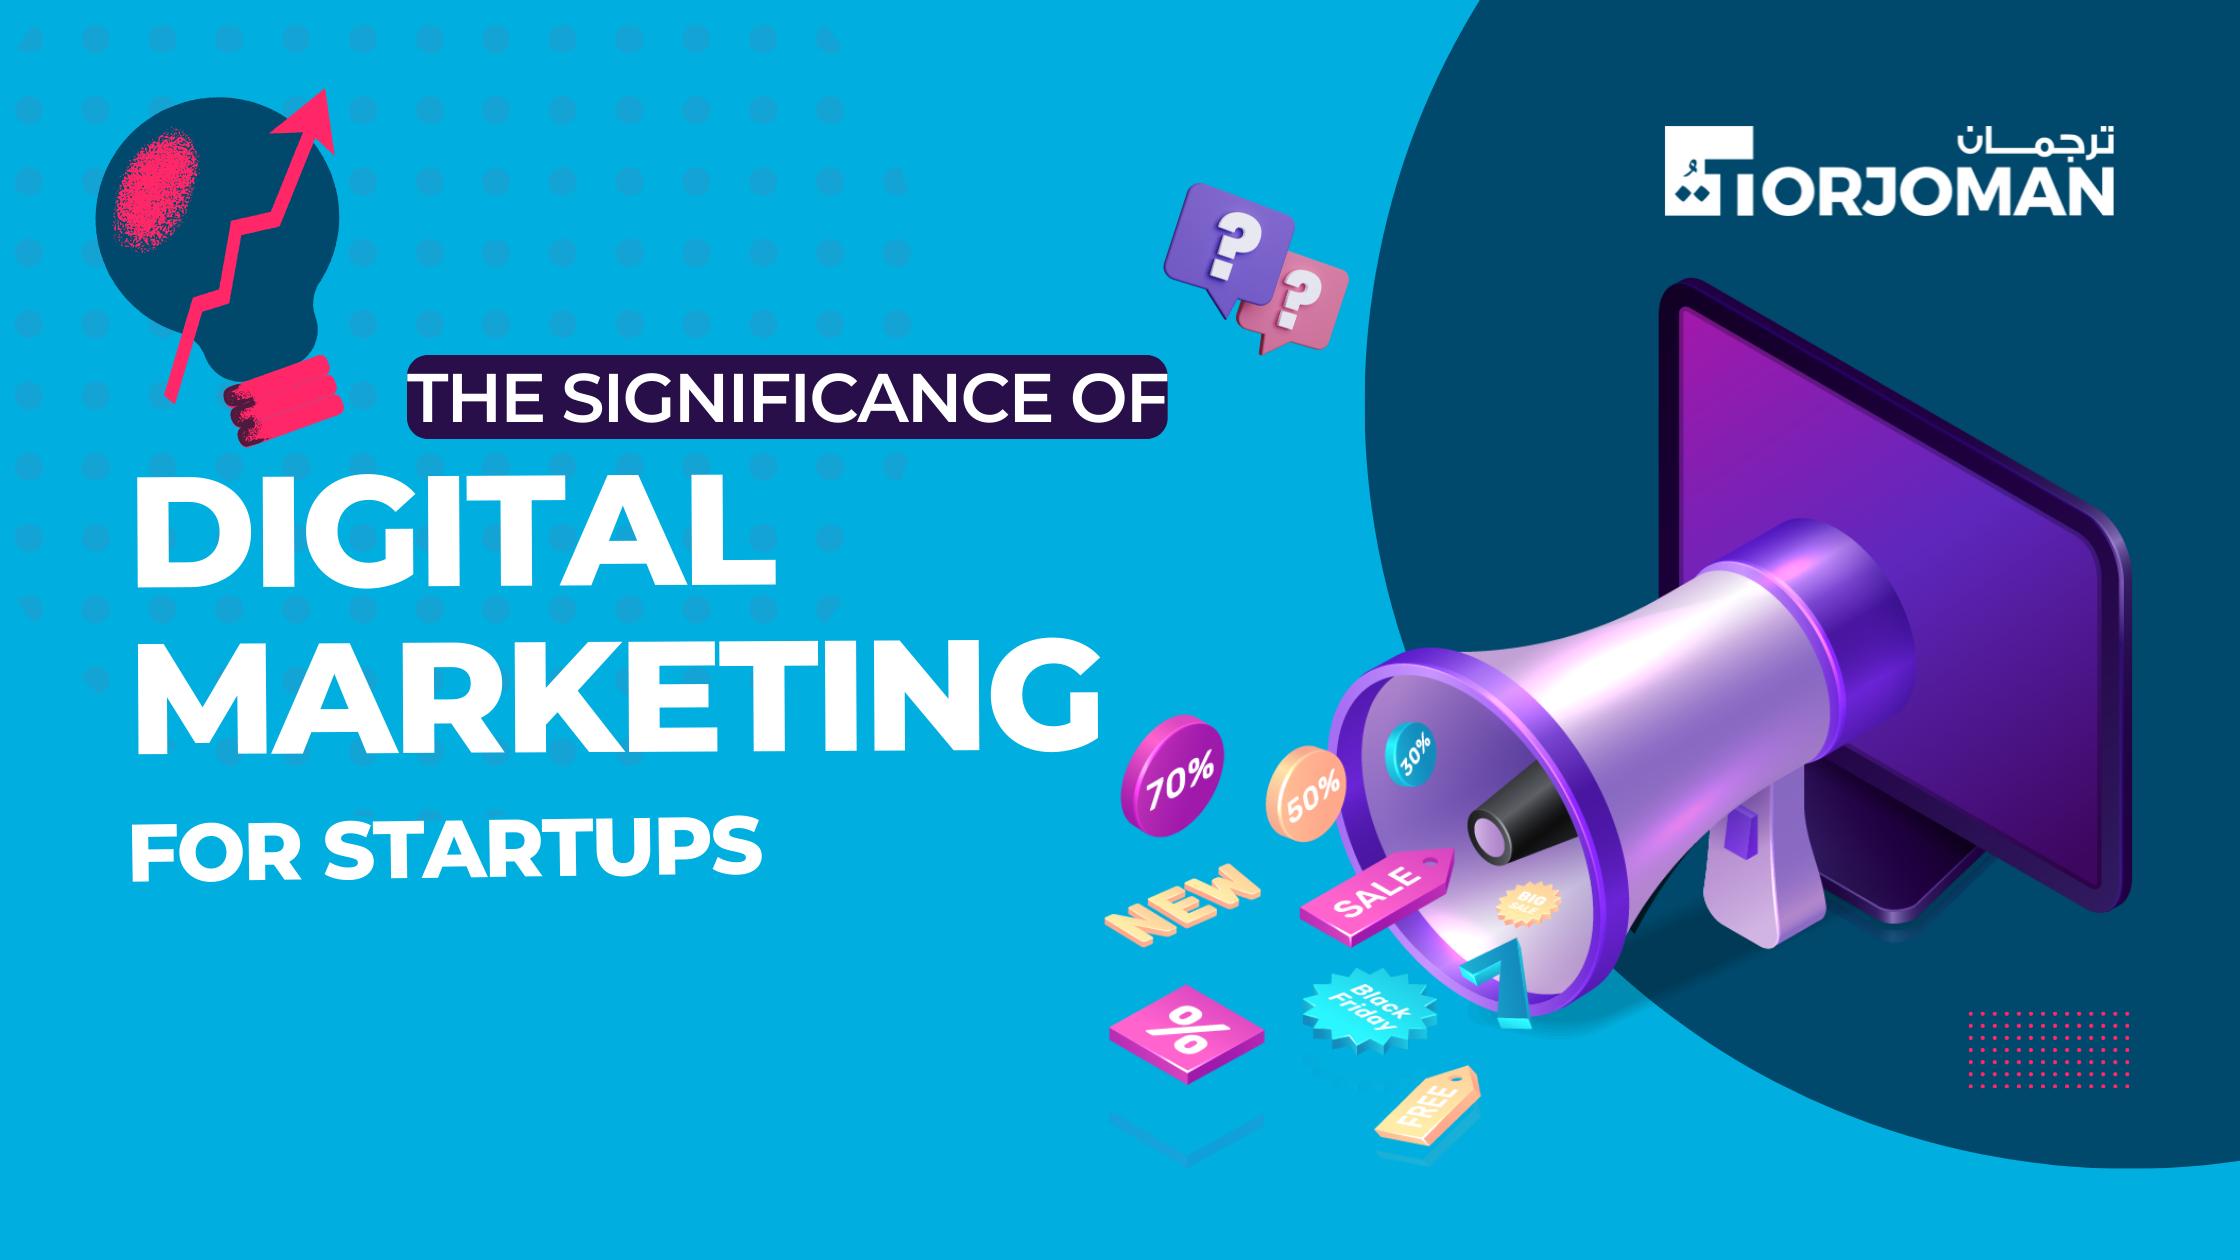 the-significance-of-digital-marketing-for-startups-torjoman